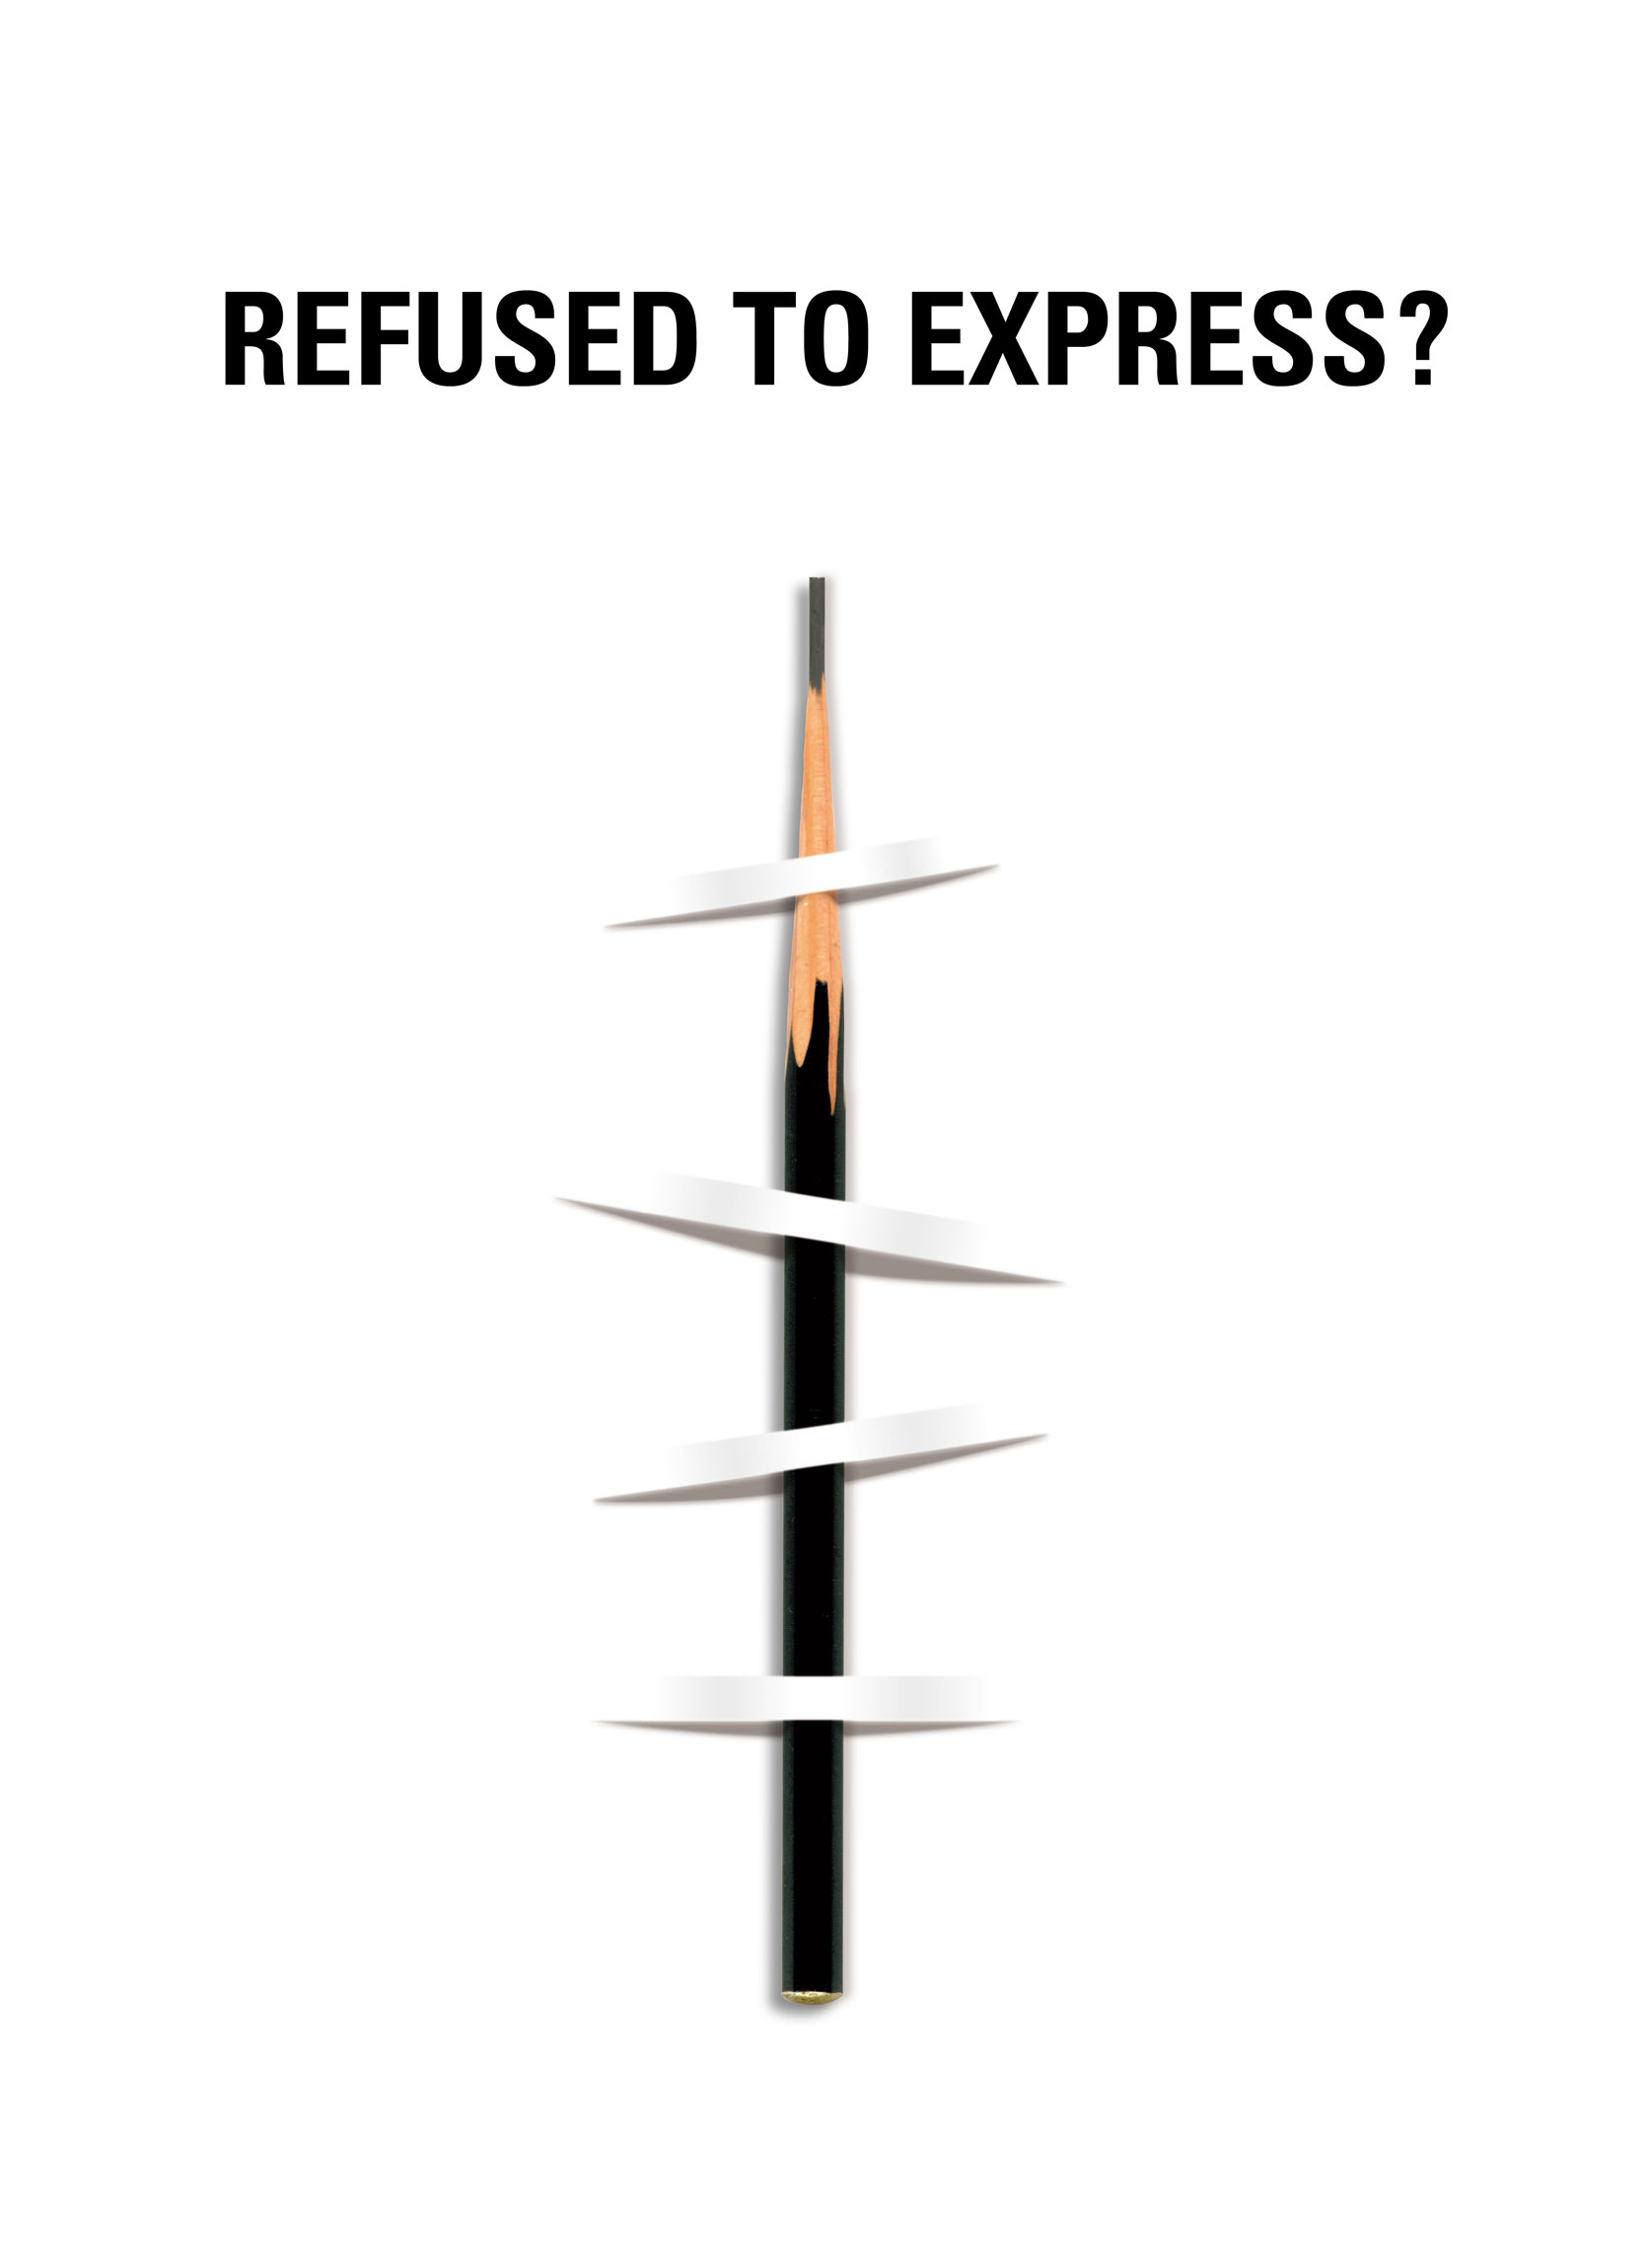 Refused to Express?